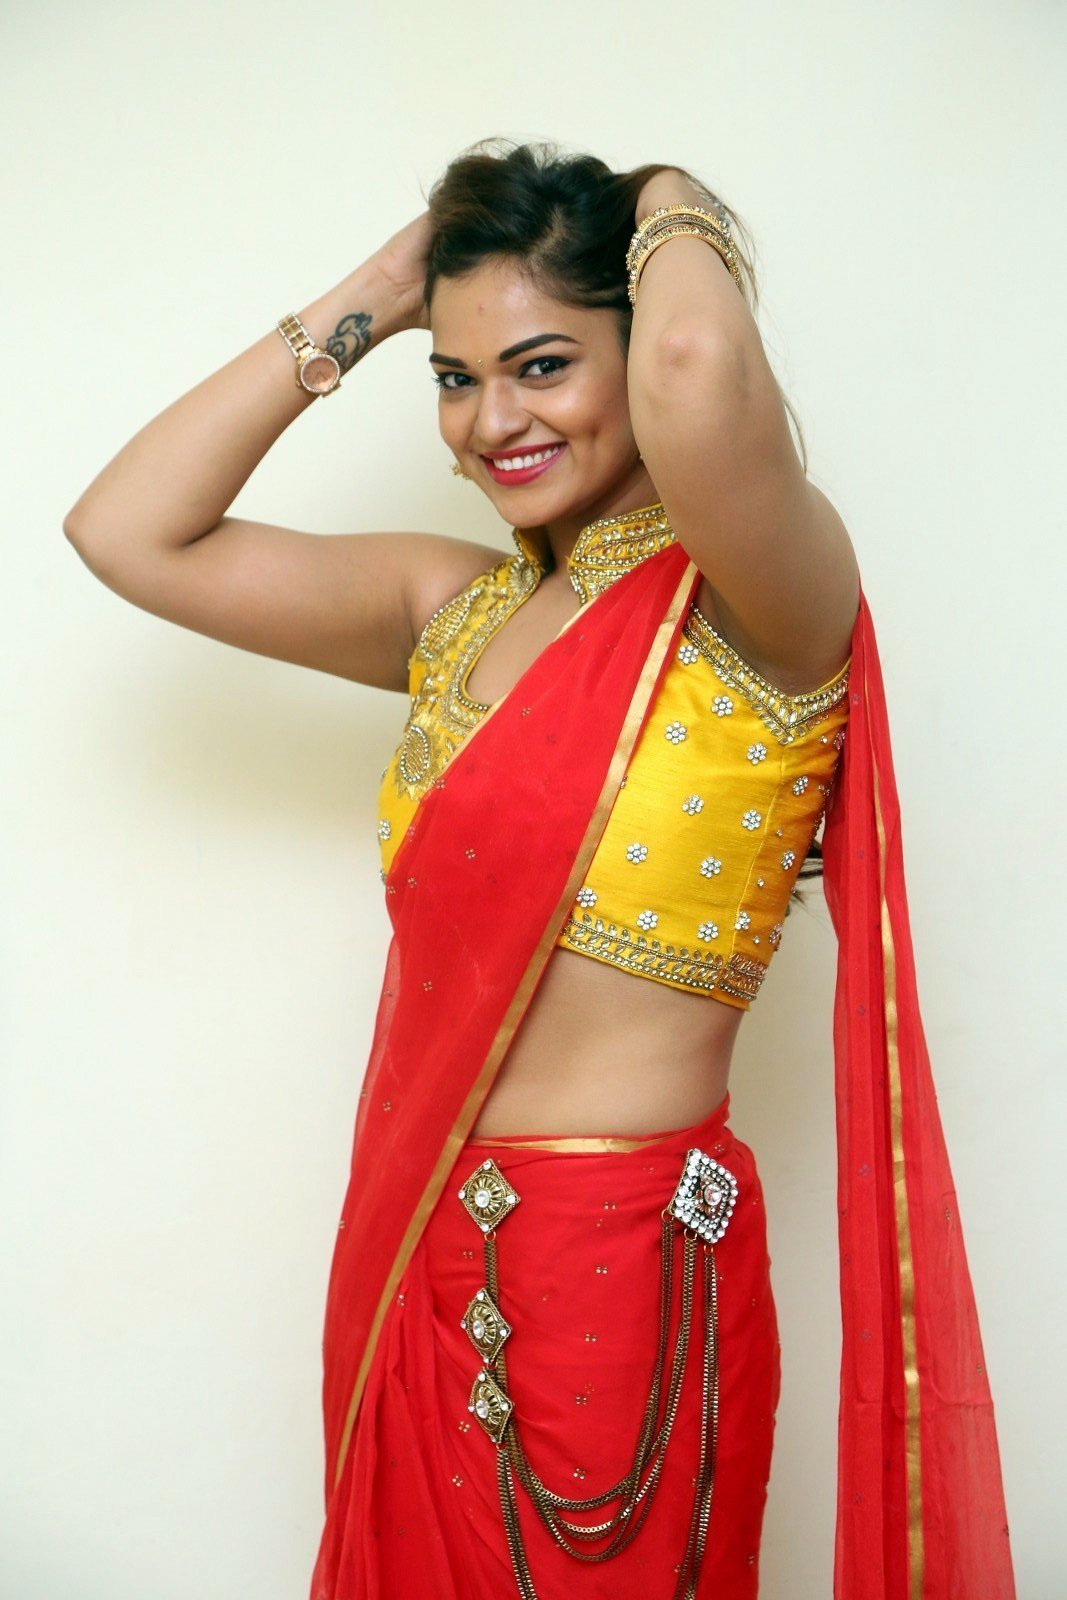 Aswini Hot in Red Saree Photos | Picture 1469881